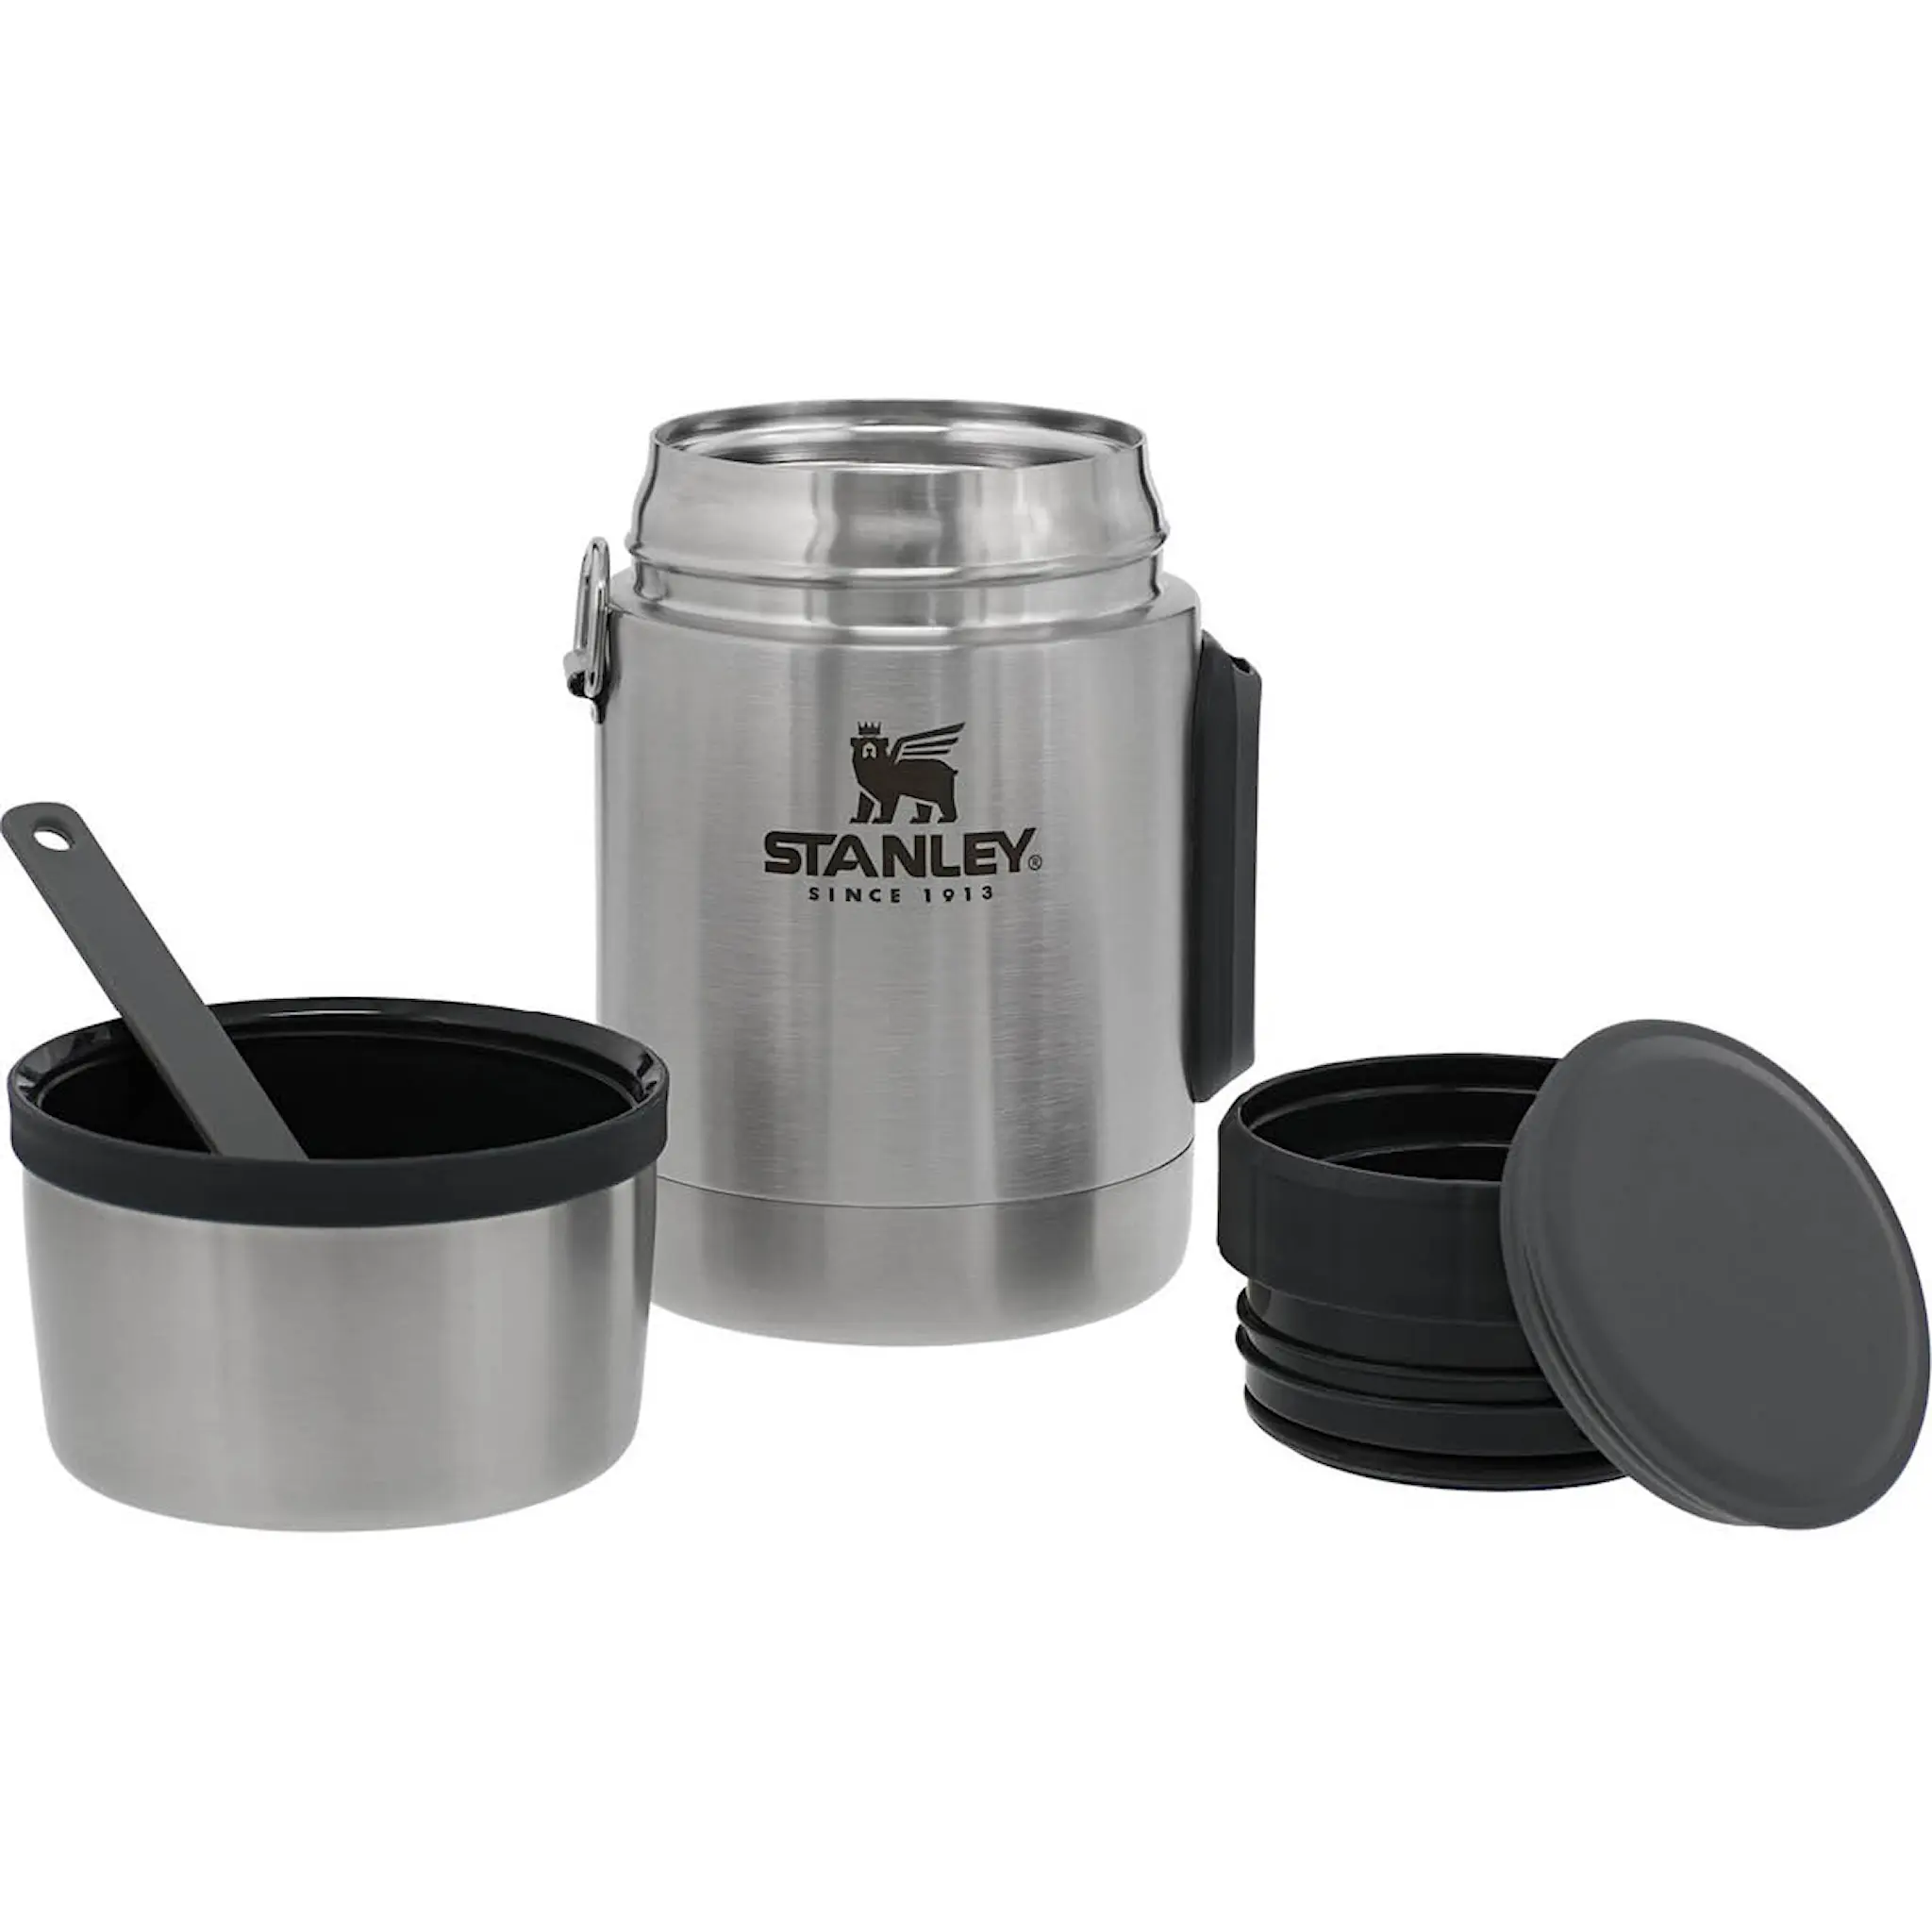 Stanley Classic Ruokatermos 53 cl Harmaa